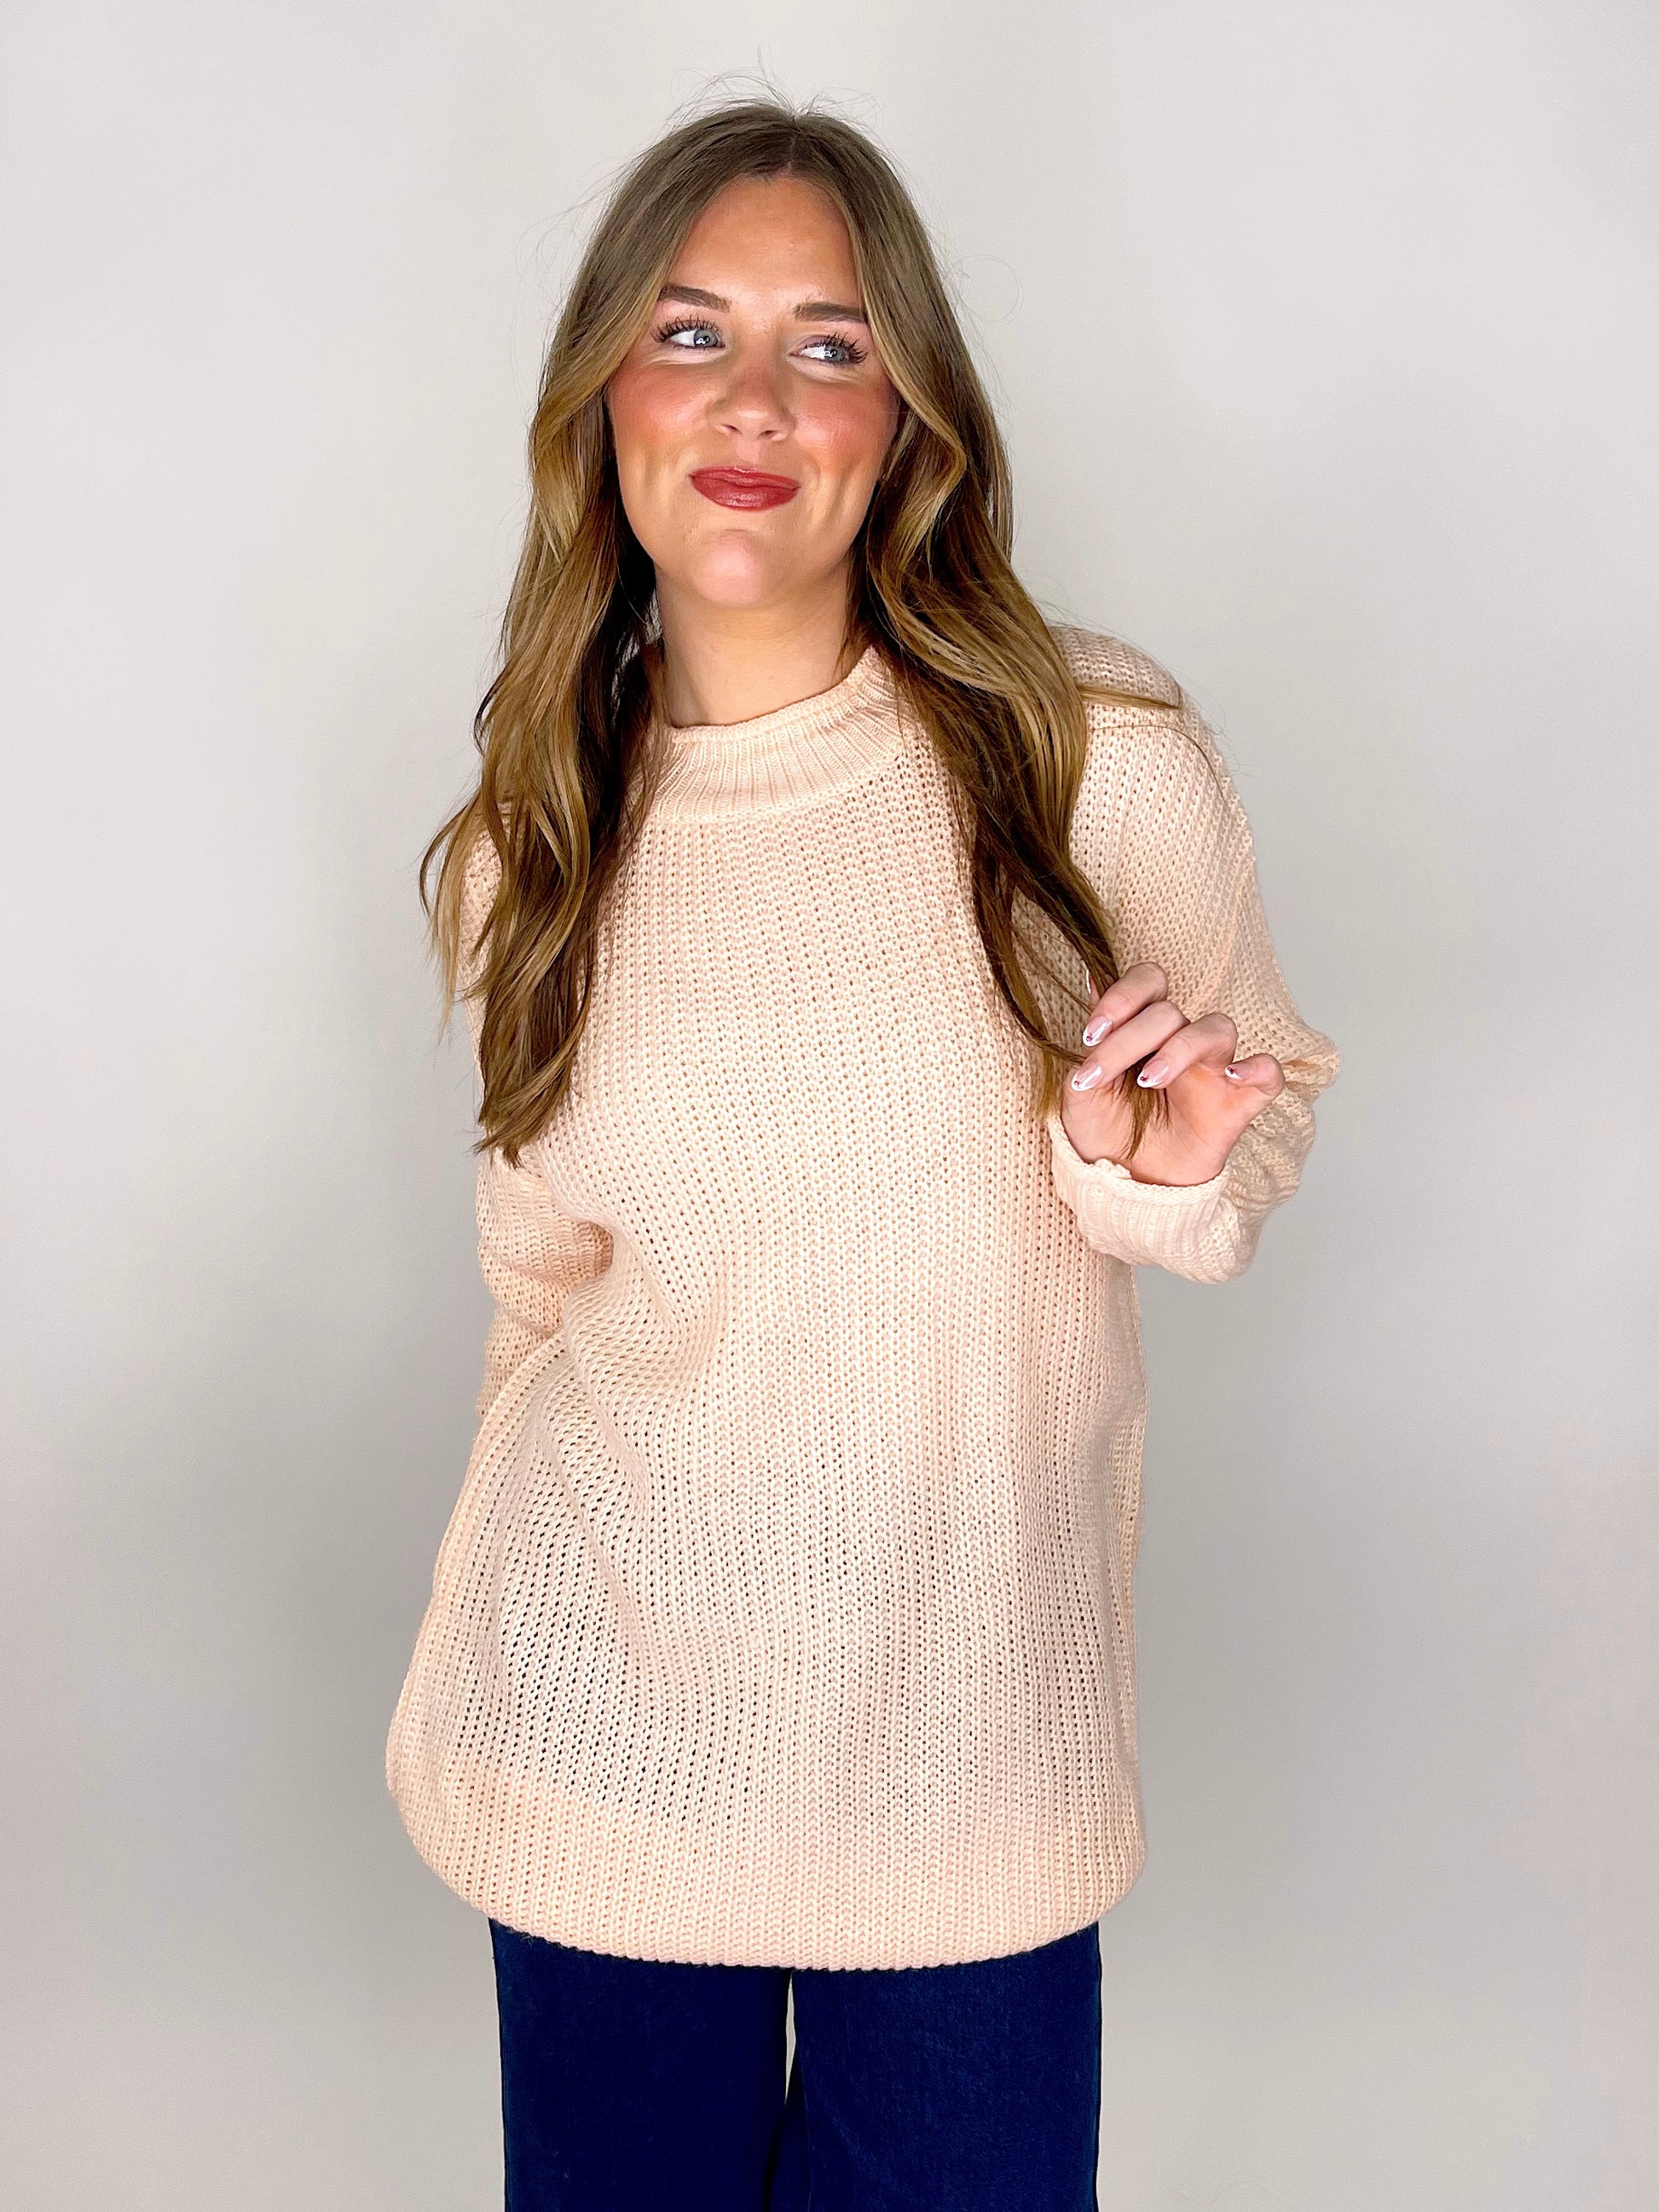 The Marit Sweater-Sweaters-Davi & Dani-The Village Shoppe, Women’s Fashion Boutique, Shop Online and In Store - Located in Muscle Shoals, AL.